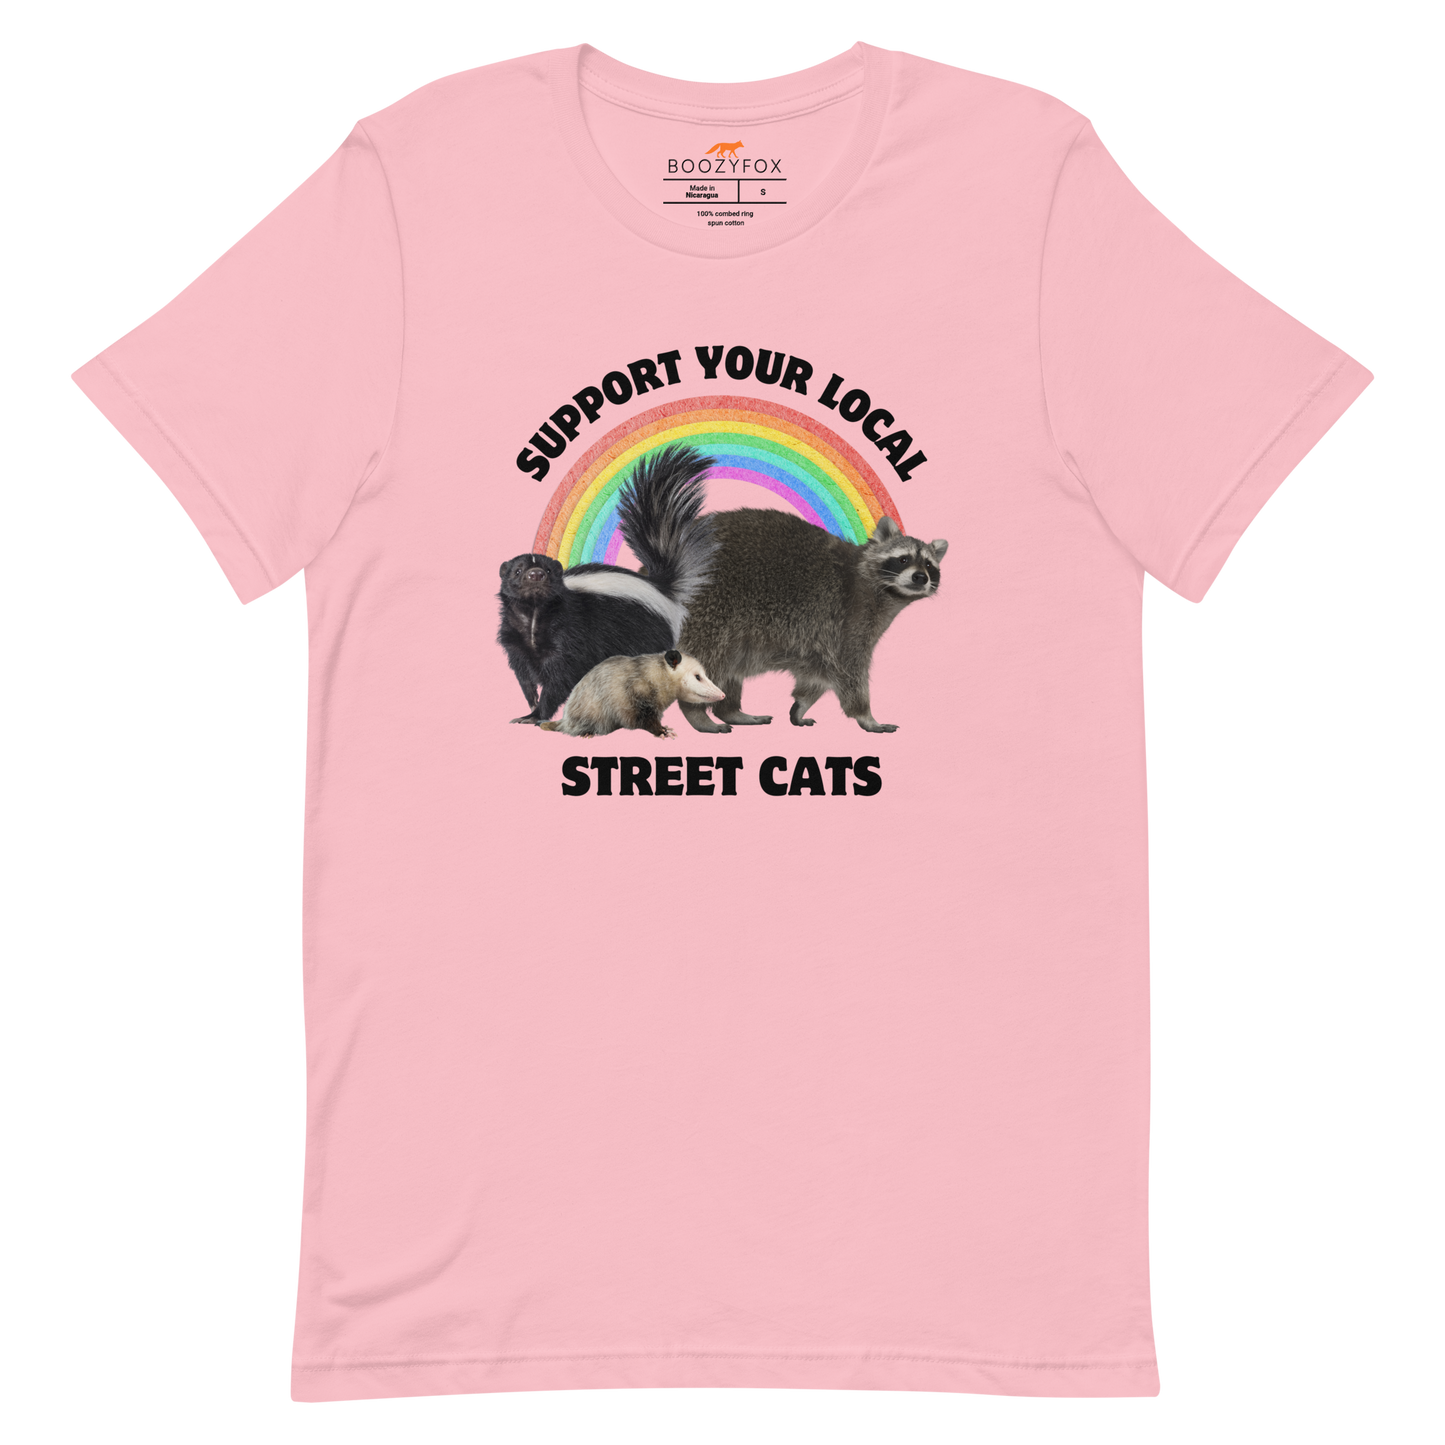 Pink Premium Street Cats Tee featuring a funny 'Support Your Local Street Cats' graphic on the chest - Funny Graphic Animal Tees - Boozy Fox